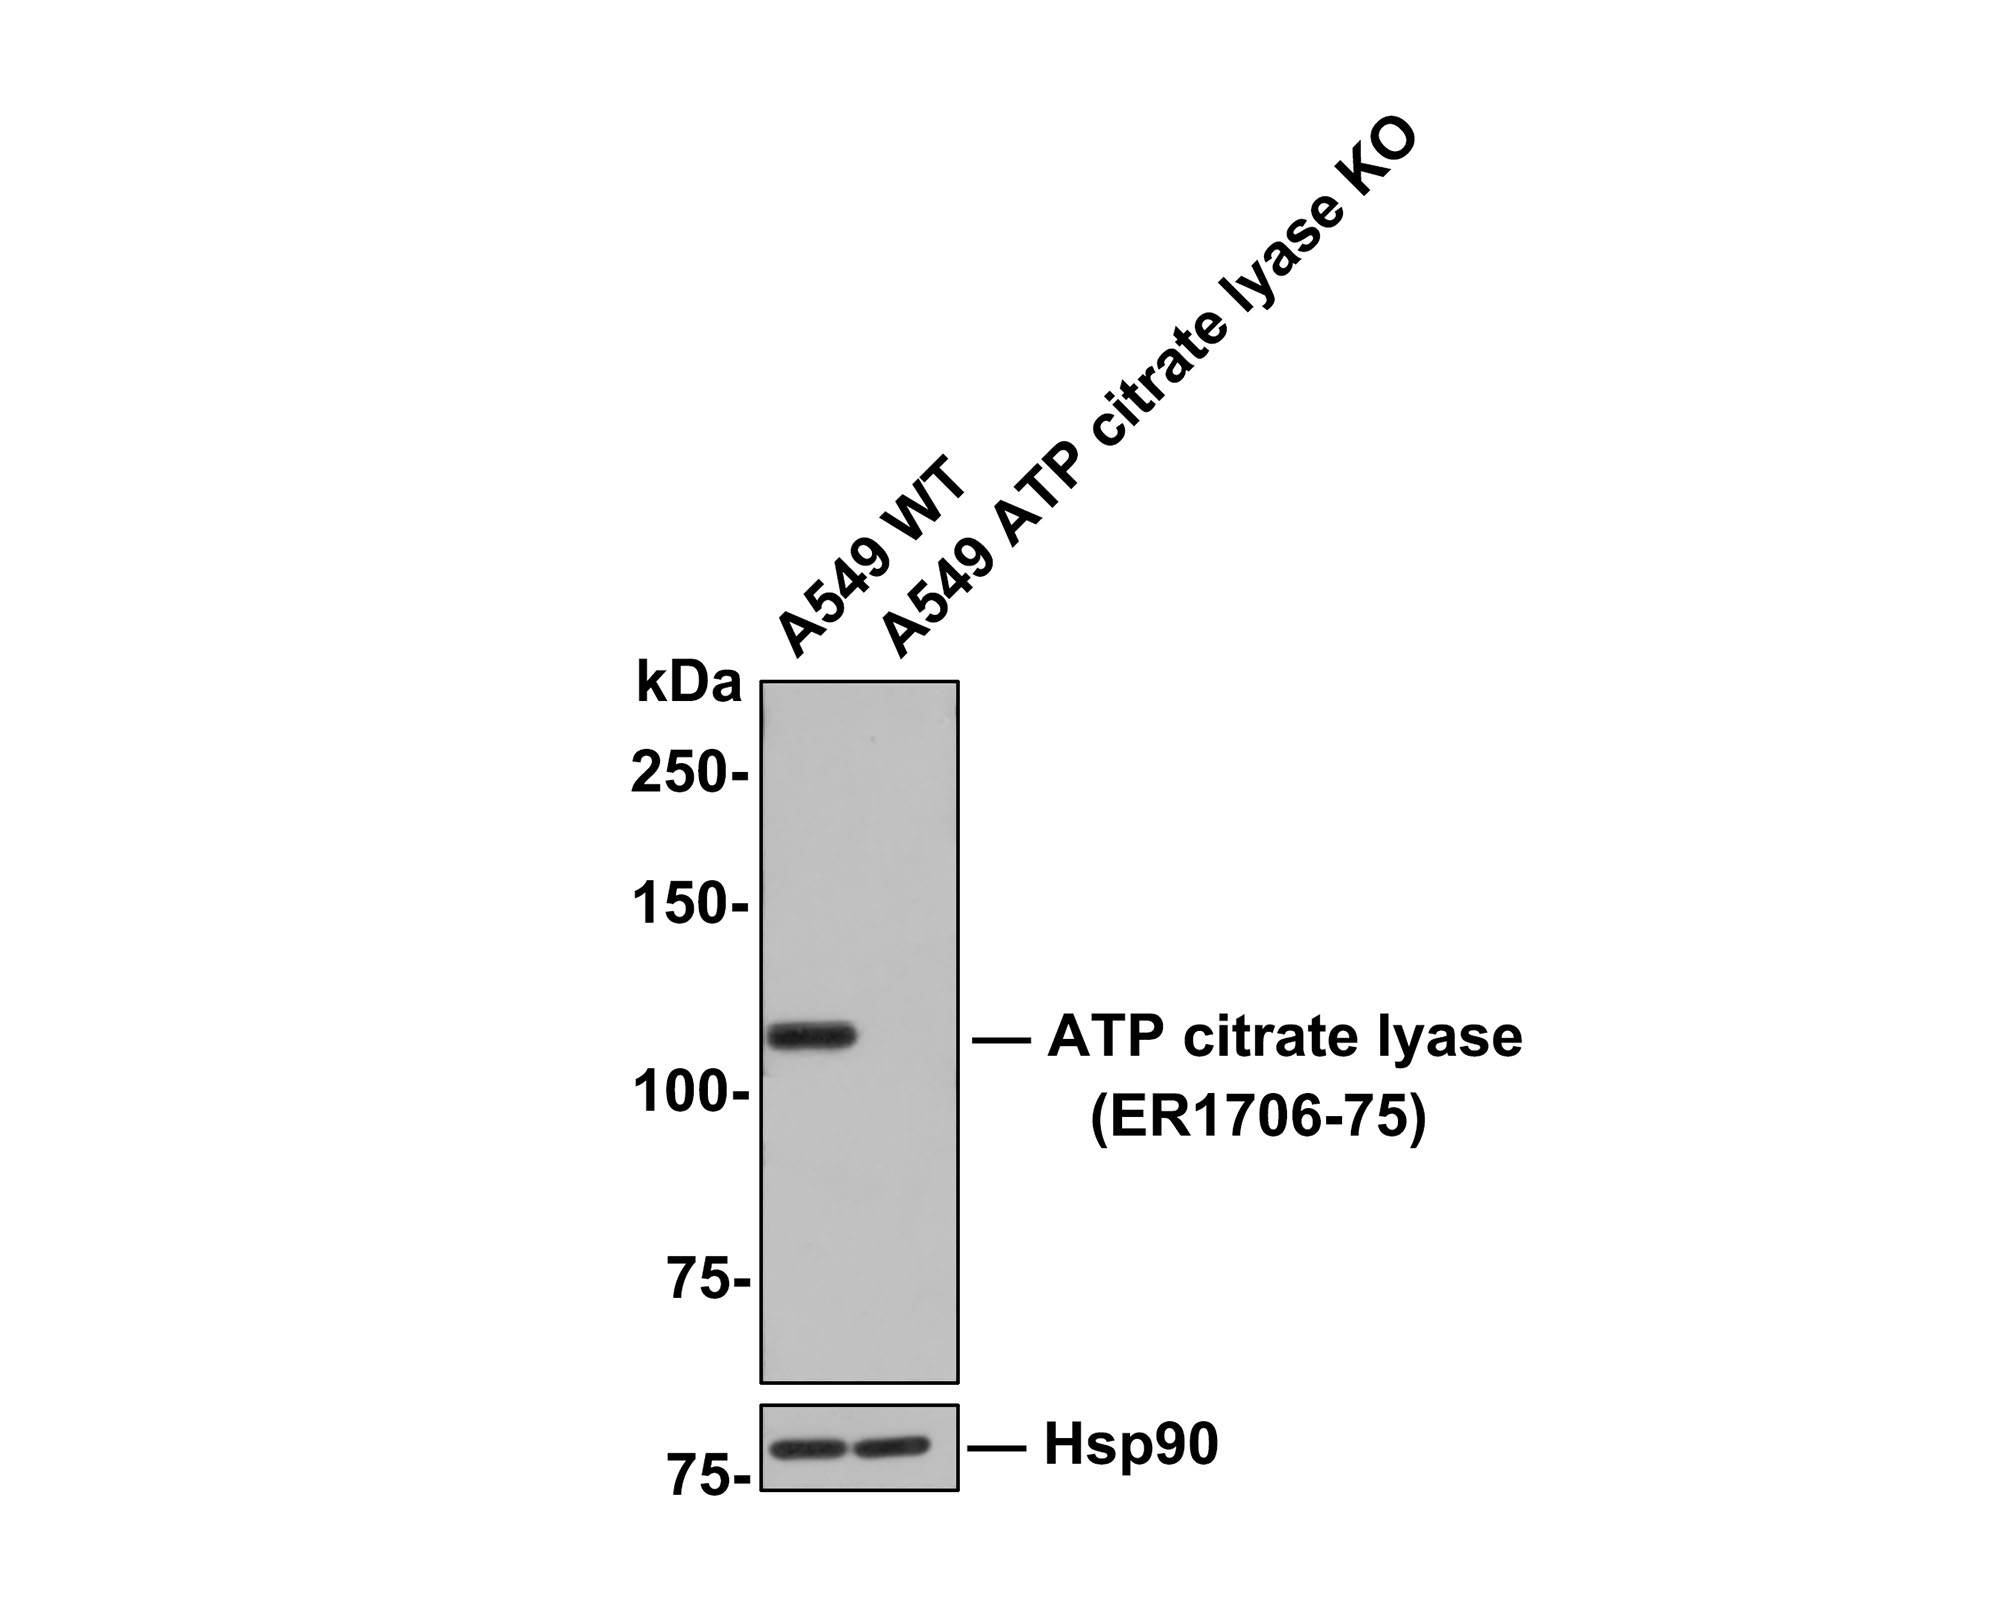 All lanes: Western blot analysis of ATP citrate lyase with anti-ATP citrate lyase antibody (ER1706-75) at 1:500 dilution.<br />
Lane 1: Wild-type A549 whole cell lysate (10 µg).<br />
Lane 2: ATP citrate lyase knockout A549 whole cell lysate (10 µg).<br />
<br />
ER1706-75 was shown to specifically react with ATP citrate lyase in wild-type A549 cells. No band was observed when ATP citrate lyase knockout sample was tested. Wild-type and ATP citrate lyase knockout samples were subjected to SDS-PAGE. Proteins were transferred to a PVDF membrane and blocked with 5% NFDM in TBST for 1 hour at room temperature. The primary antibody (ER1706-75, 1:500) was used in 5% BSA at room temperature for 2 hours. Goat Anti-Rabbit IgG-HRP Secondary Antibody (HA1001) at 1:300,000 dilution was used for 1 hour at room temperature.